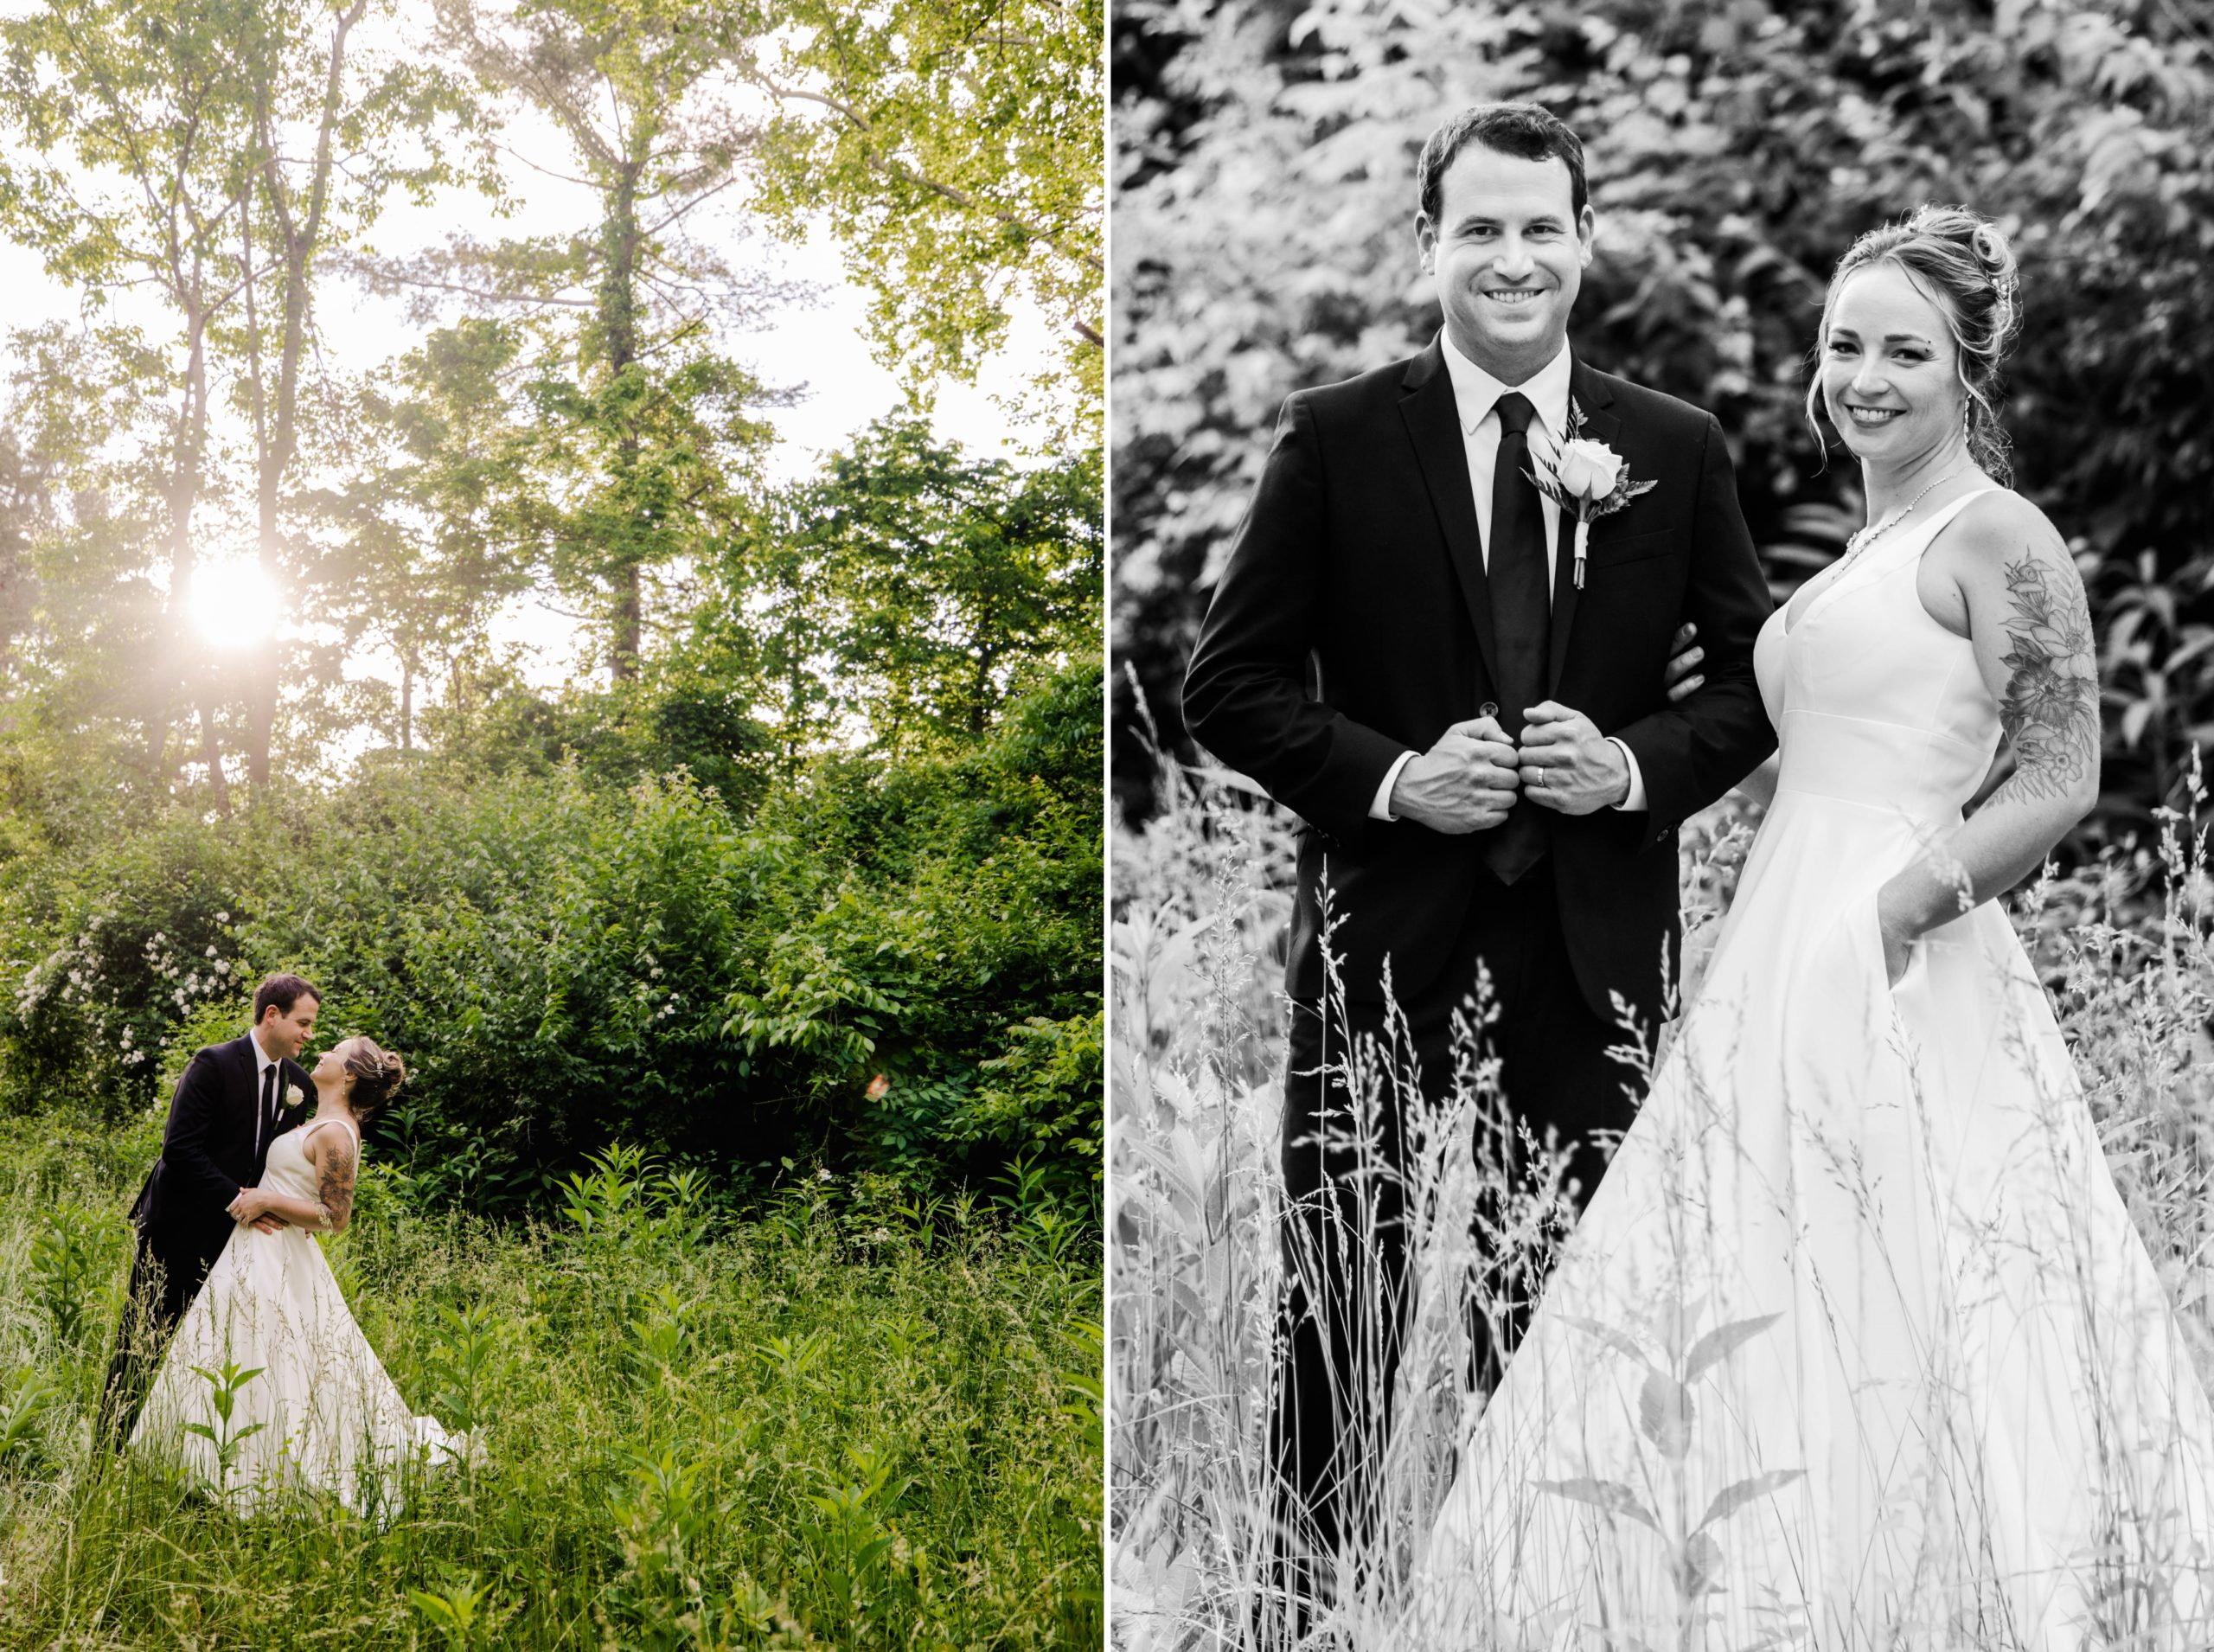 Collage of bride and groom wedding day portraits in a tall grass field 